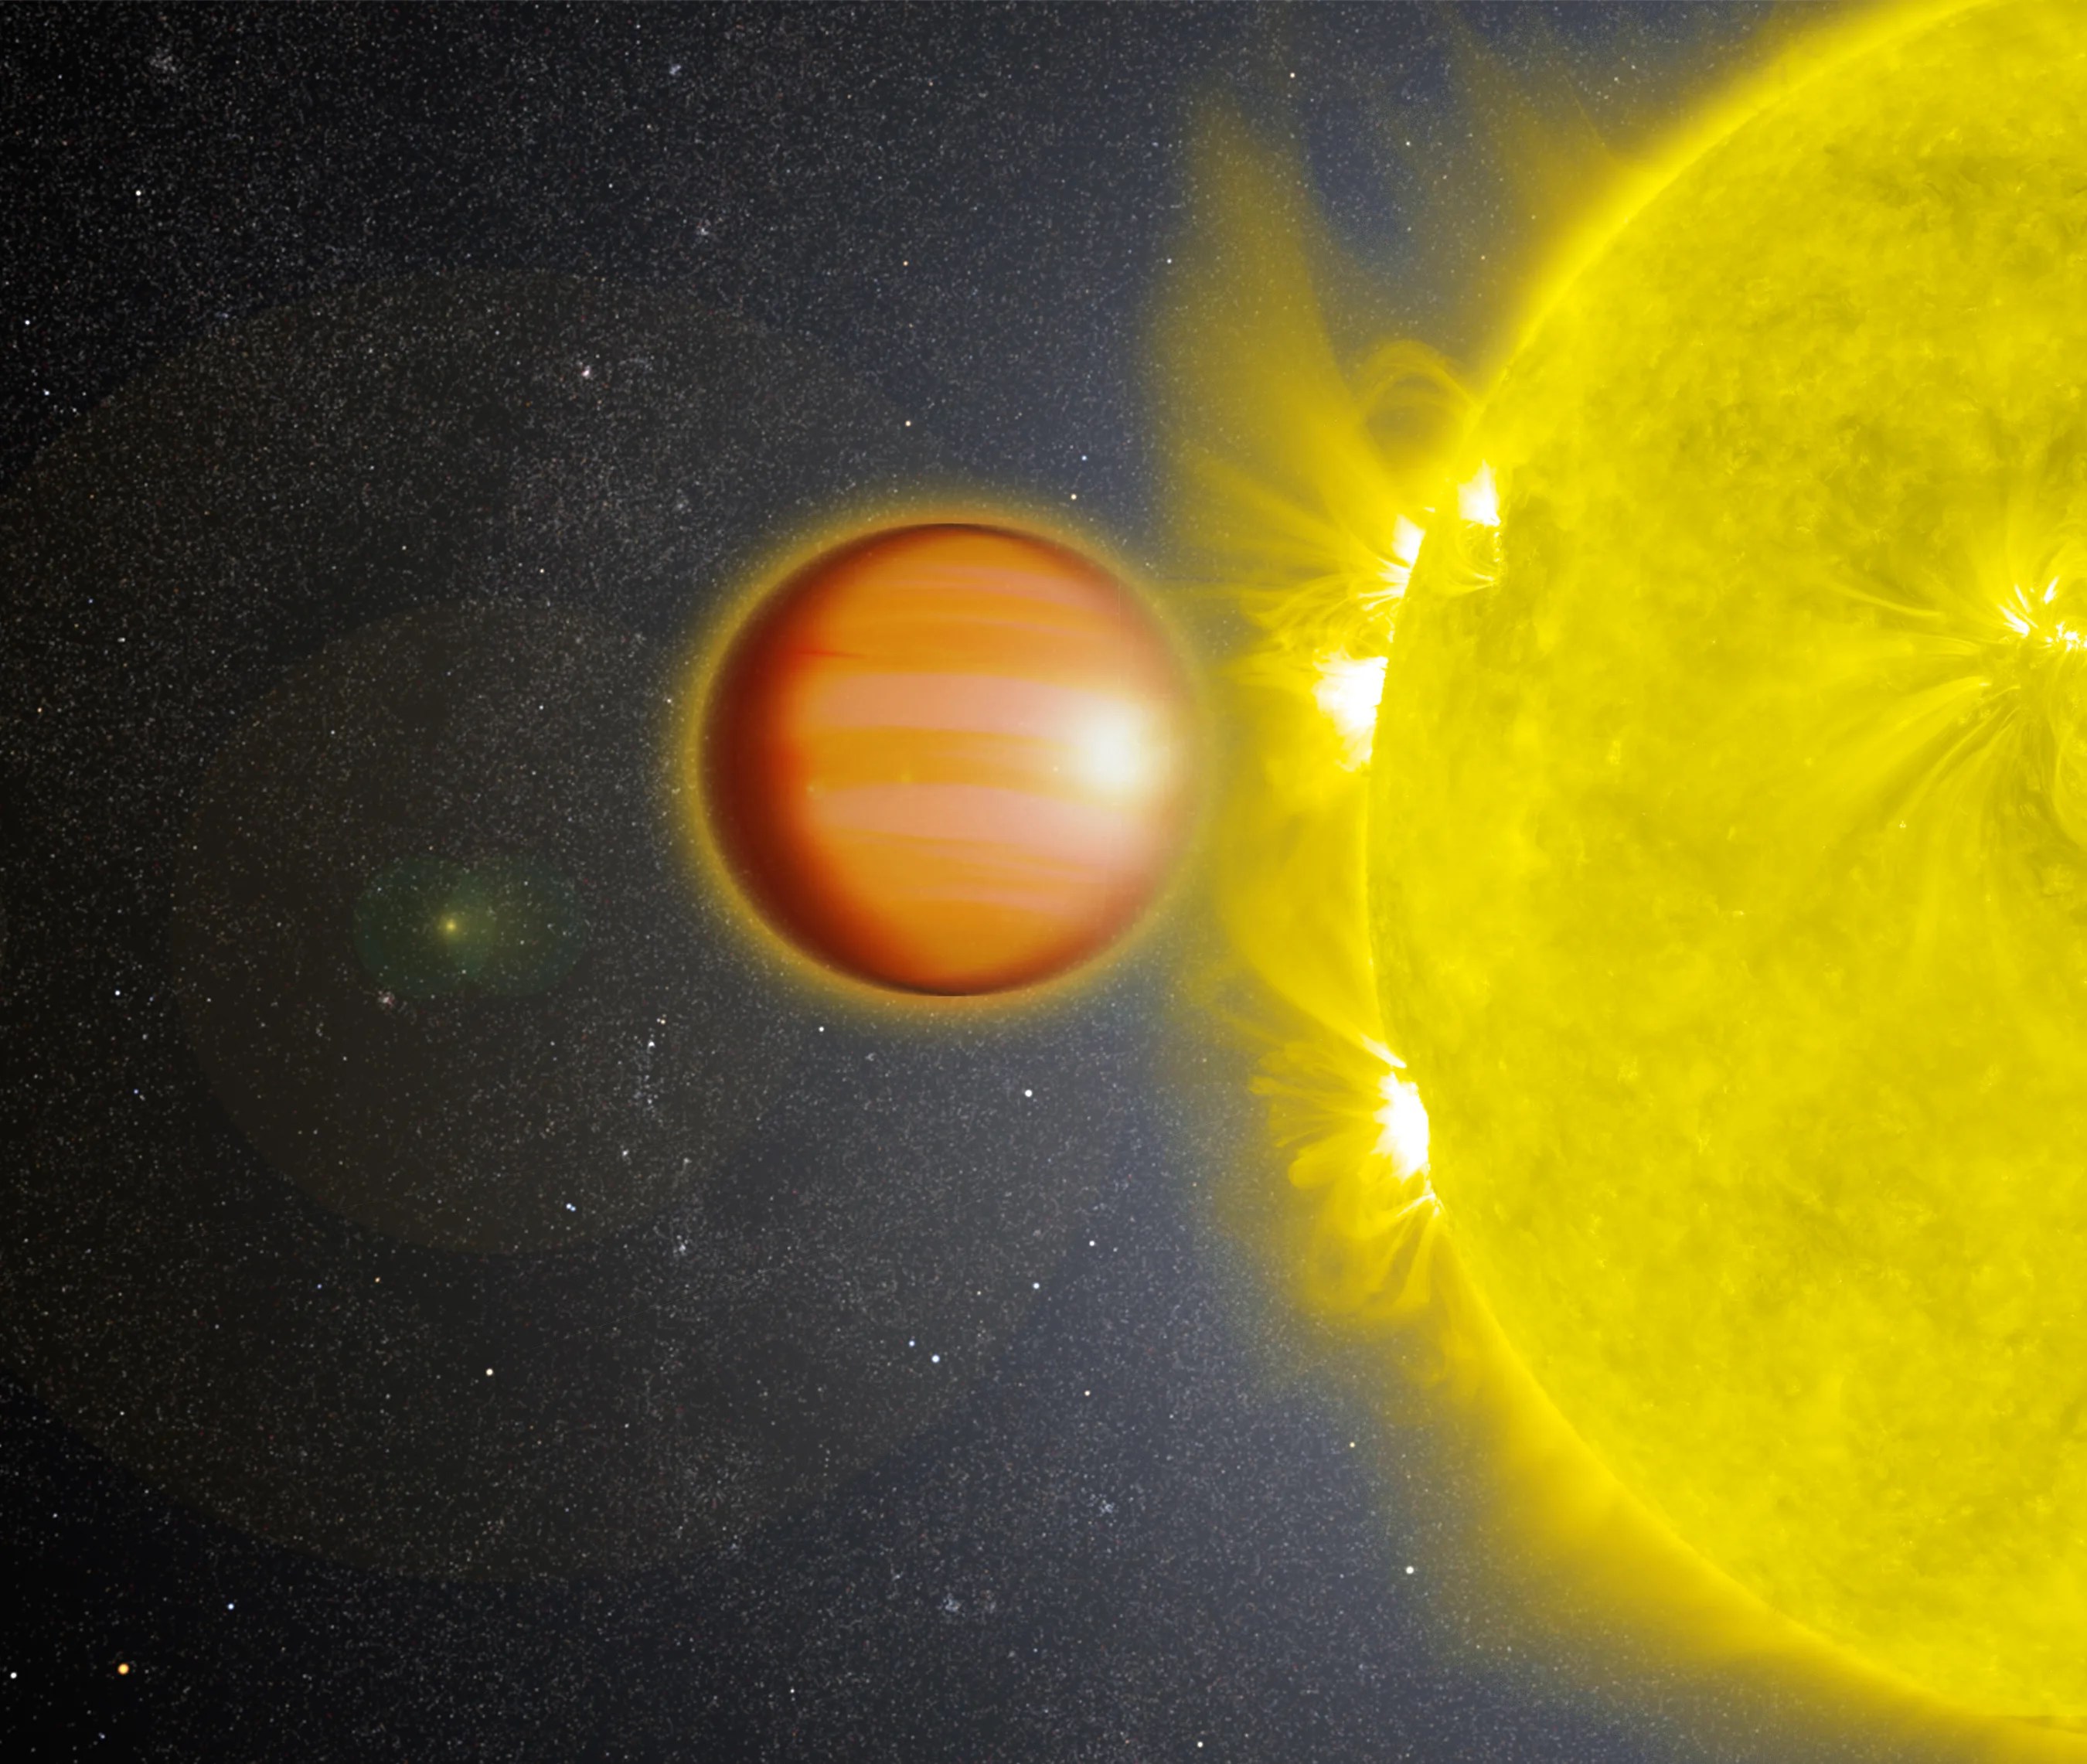 Artist's rendering of star and planet